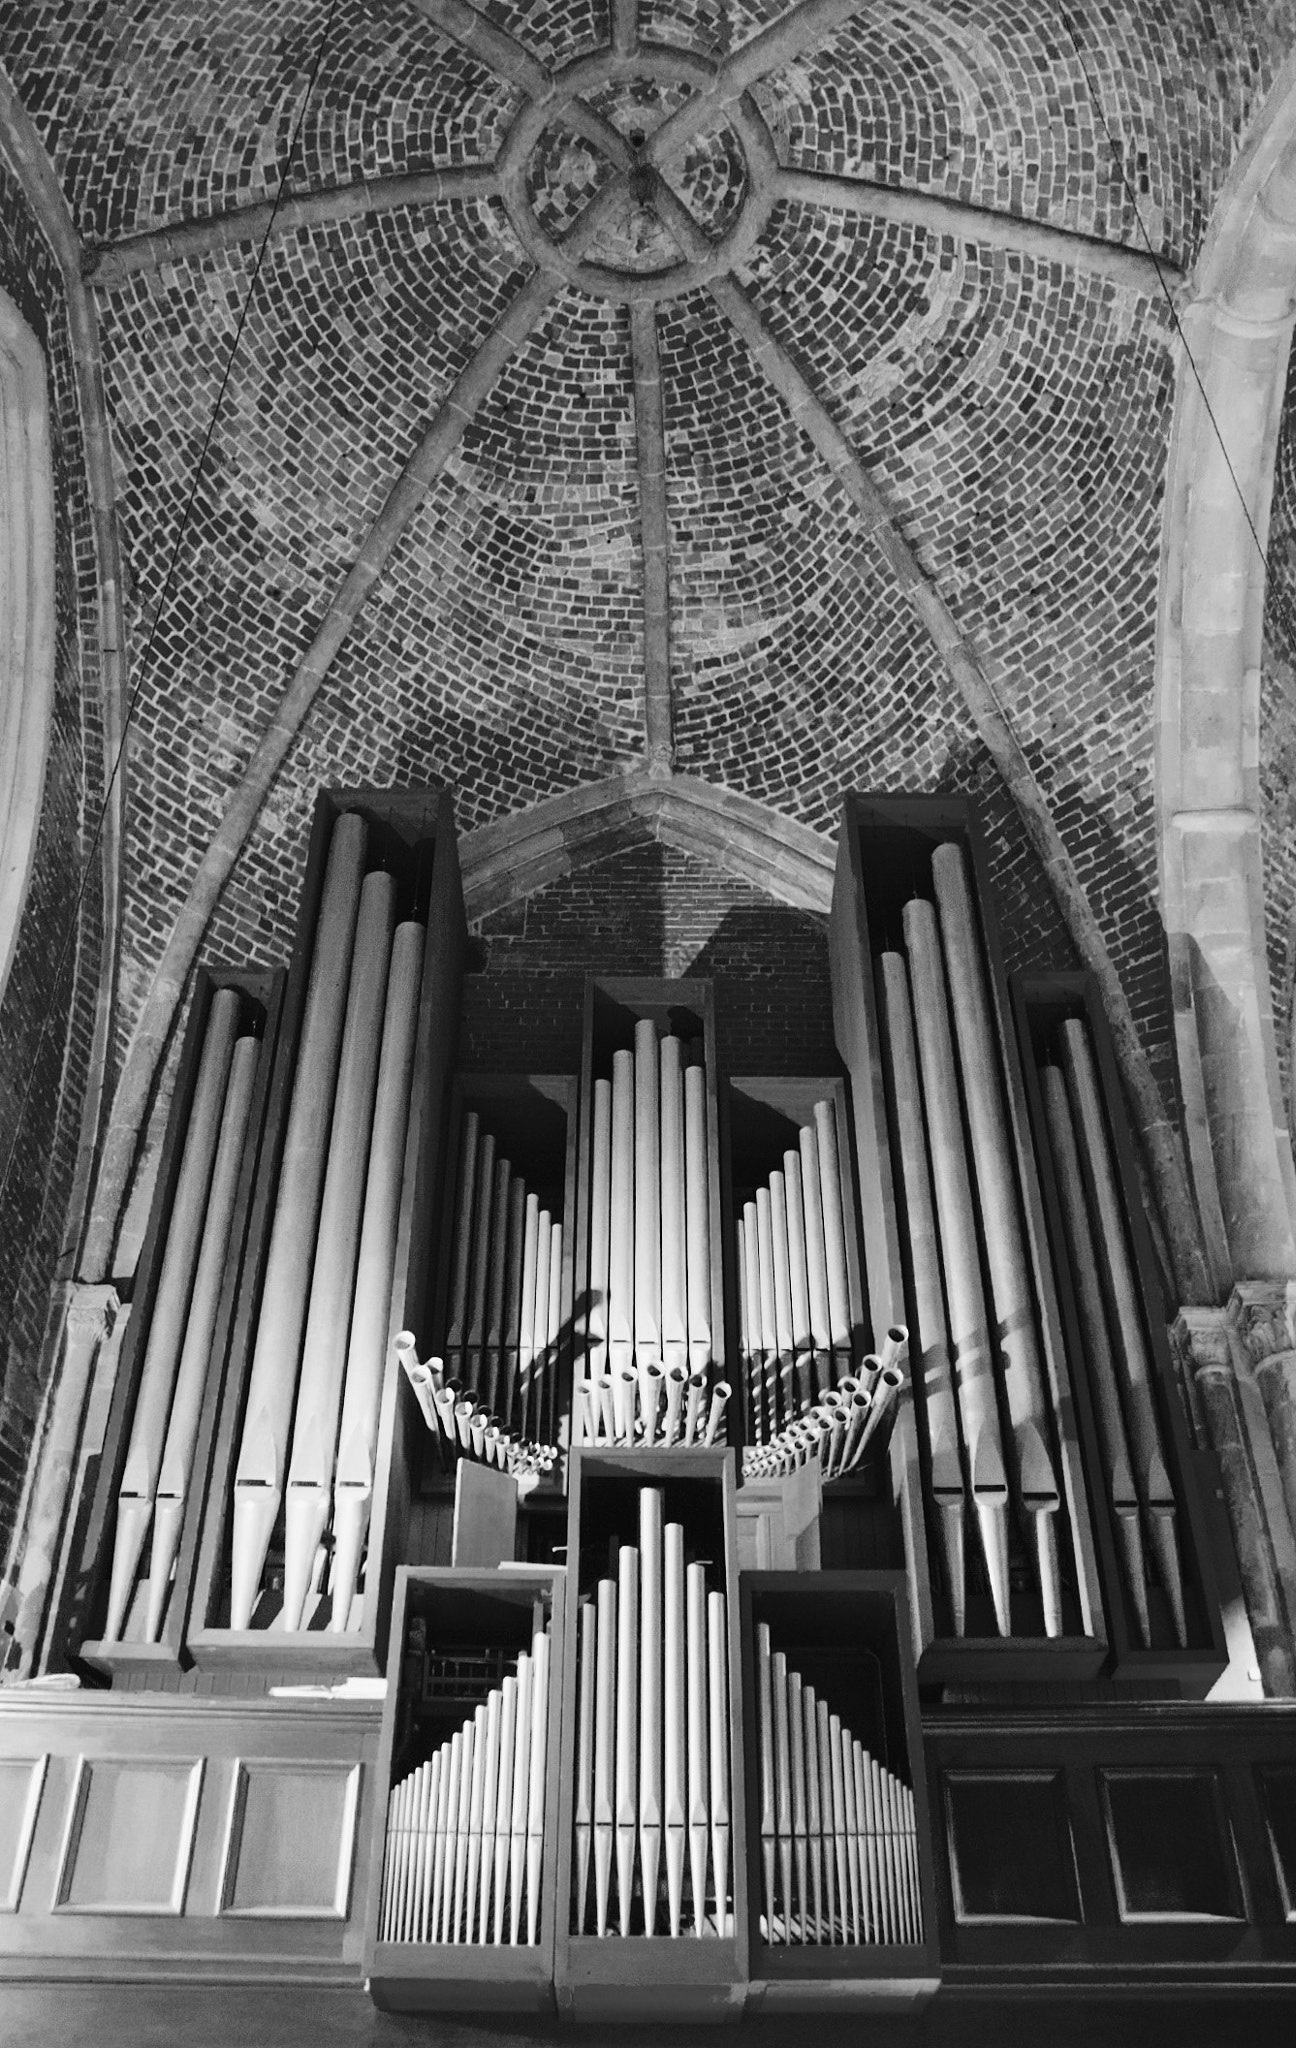 Canon EOS 70D + Sigma 18-250mm F3.5-6.3 DC OS HSM sample photo. The pipes of 'unser lieben frauen' (our dear lady's) church's organ photography